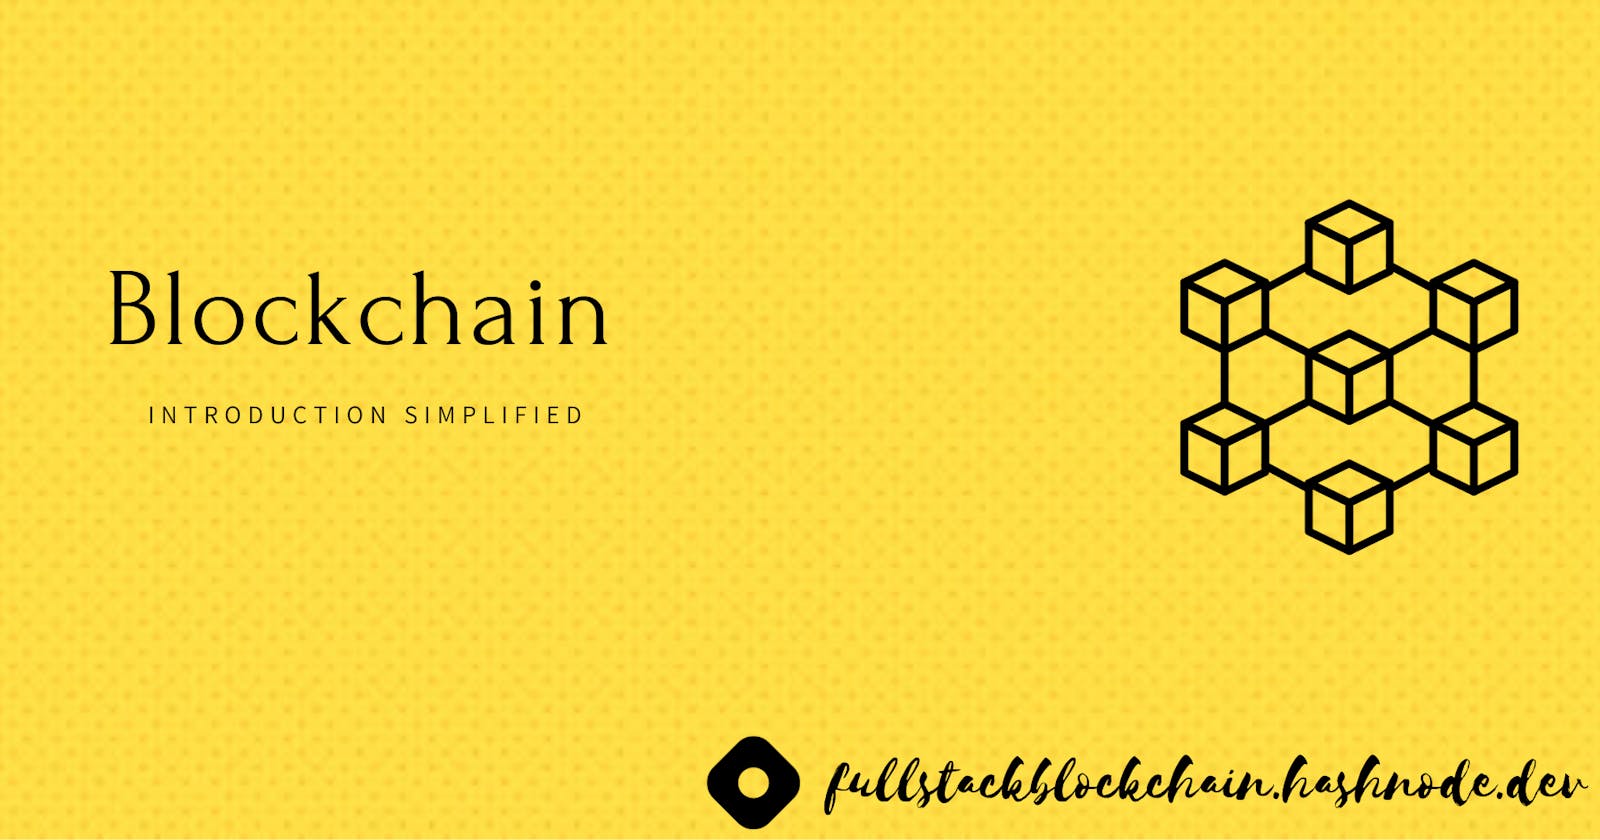 Blockchain Introduction Simplified